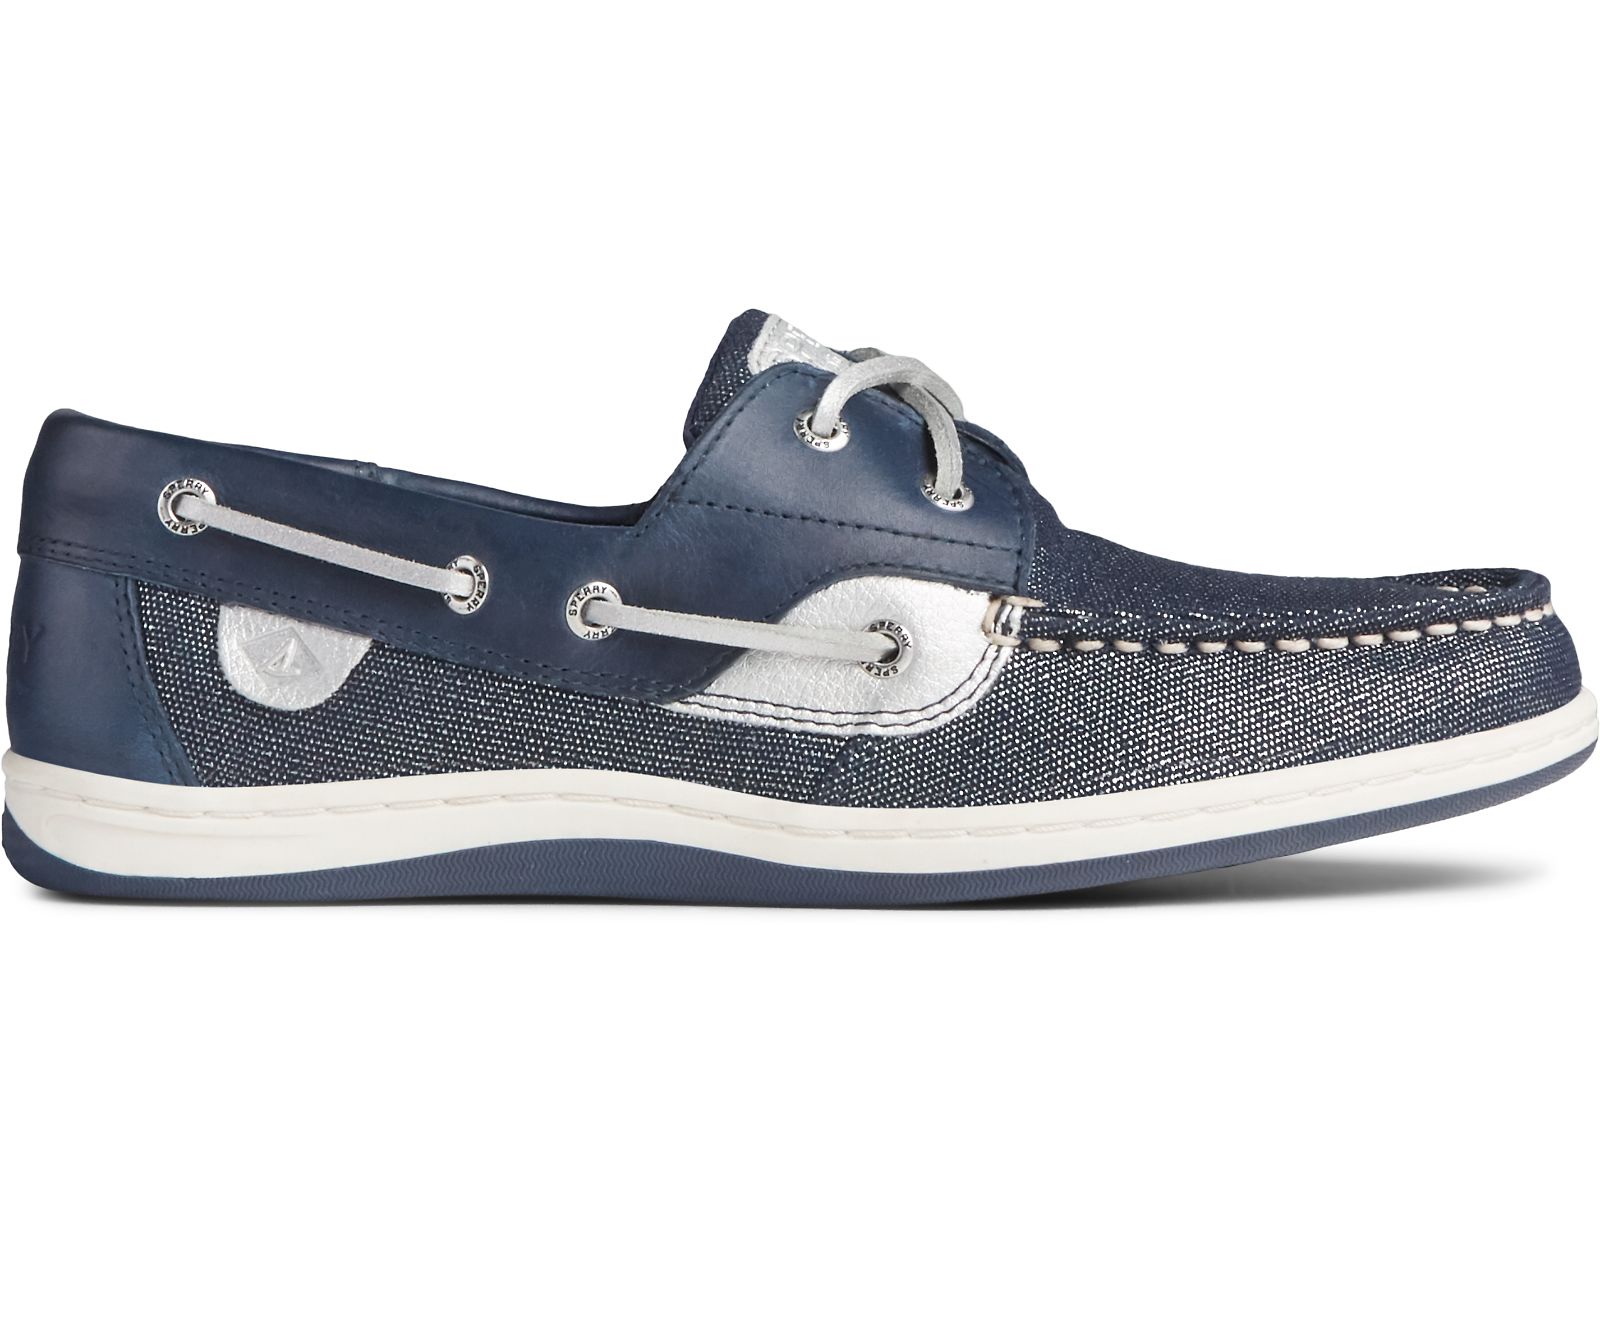 Women's Koifish Sparkle Textile Boat Shoe - Navy/Silver - Click Image to Close